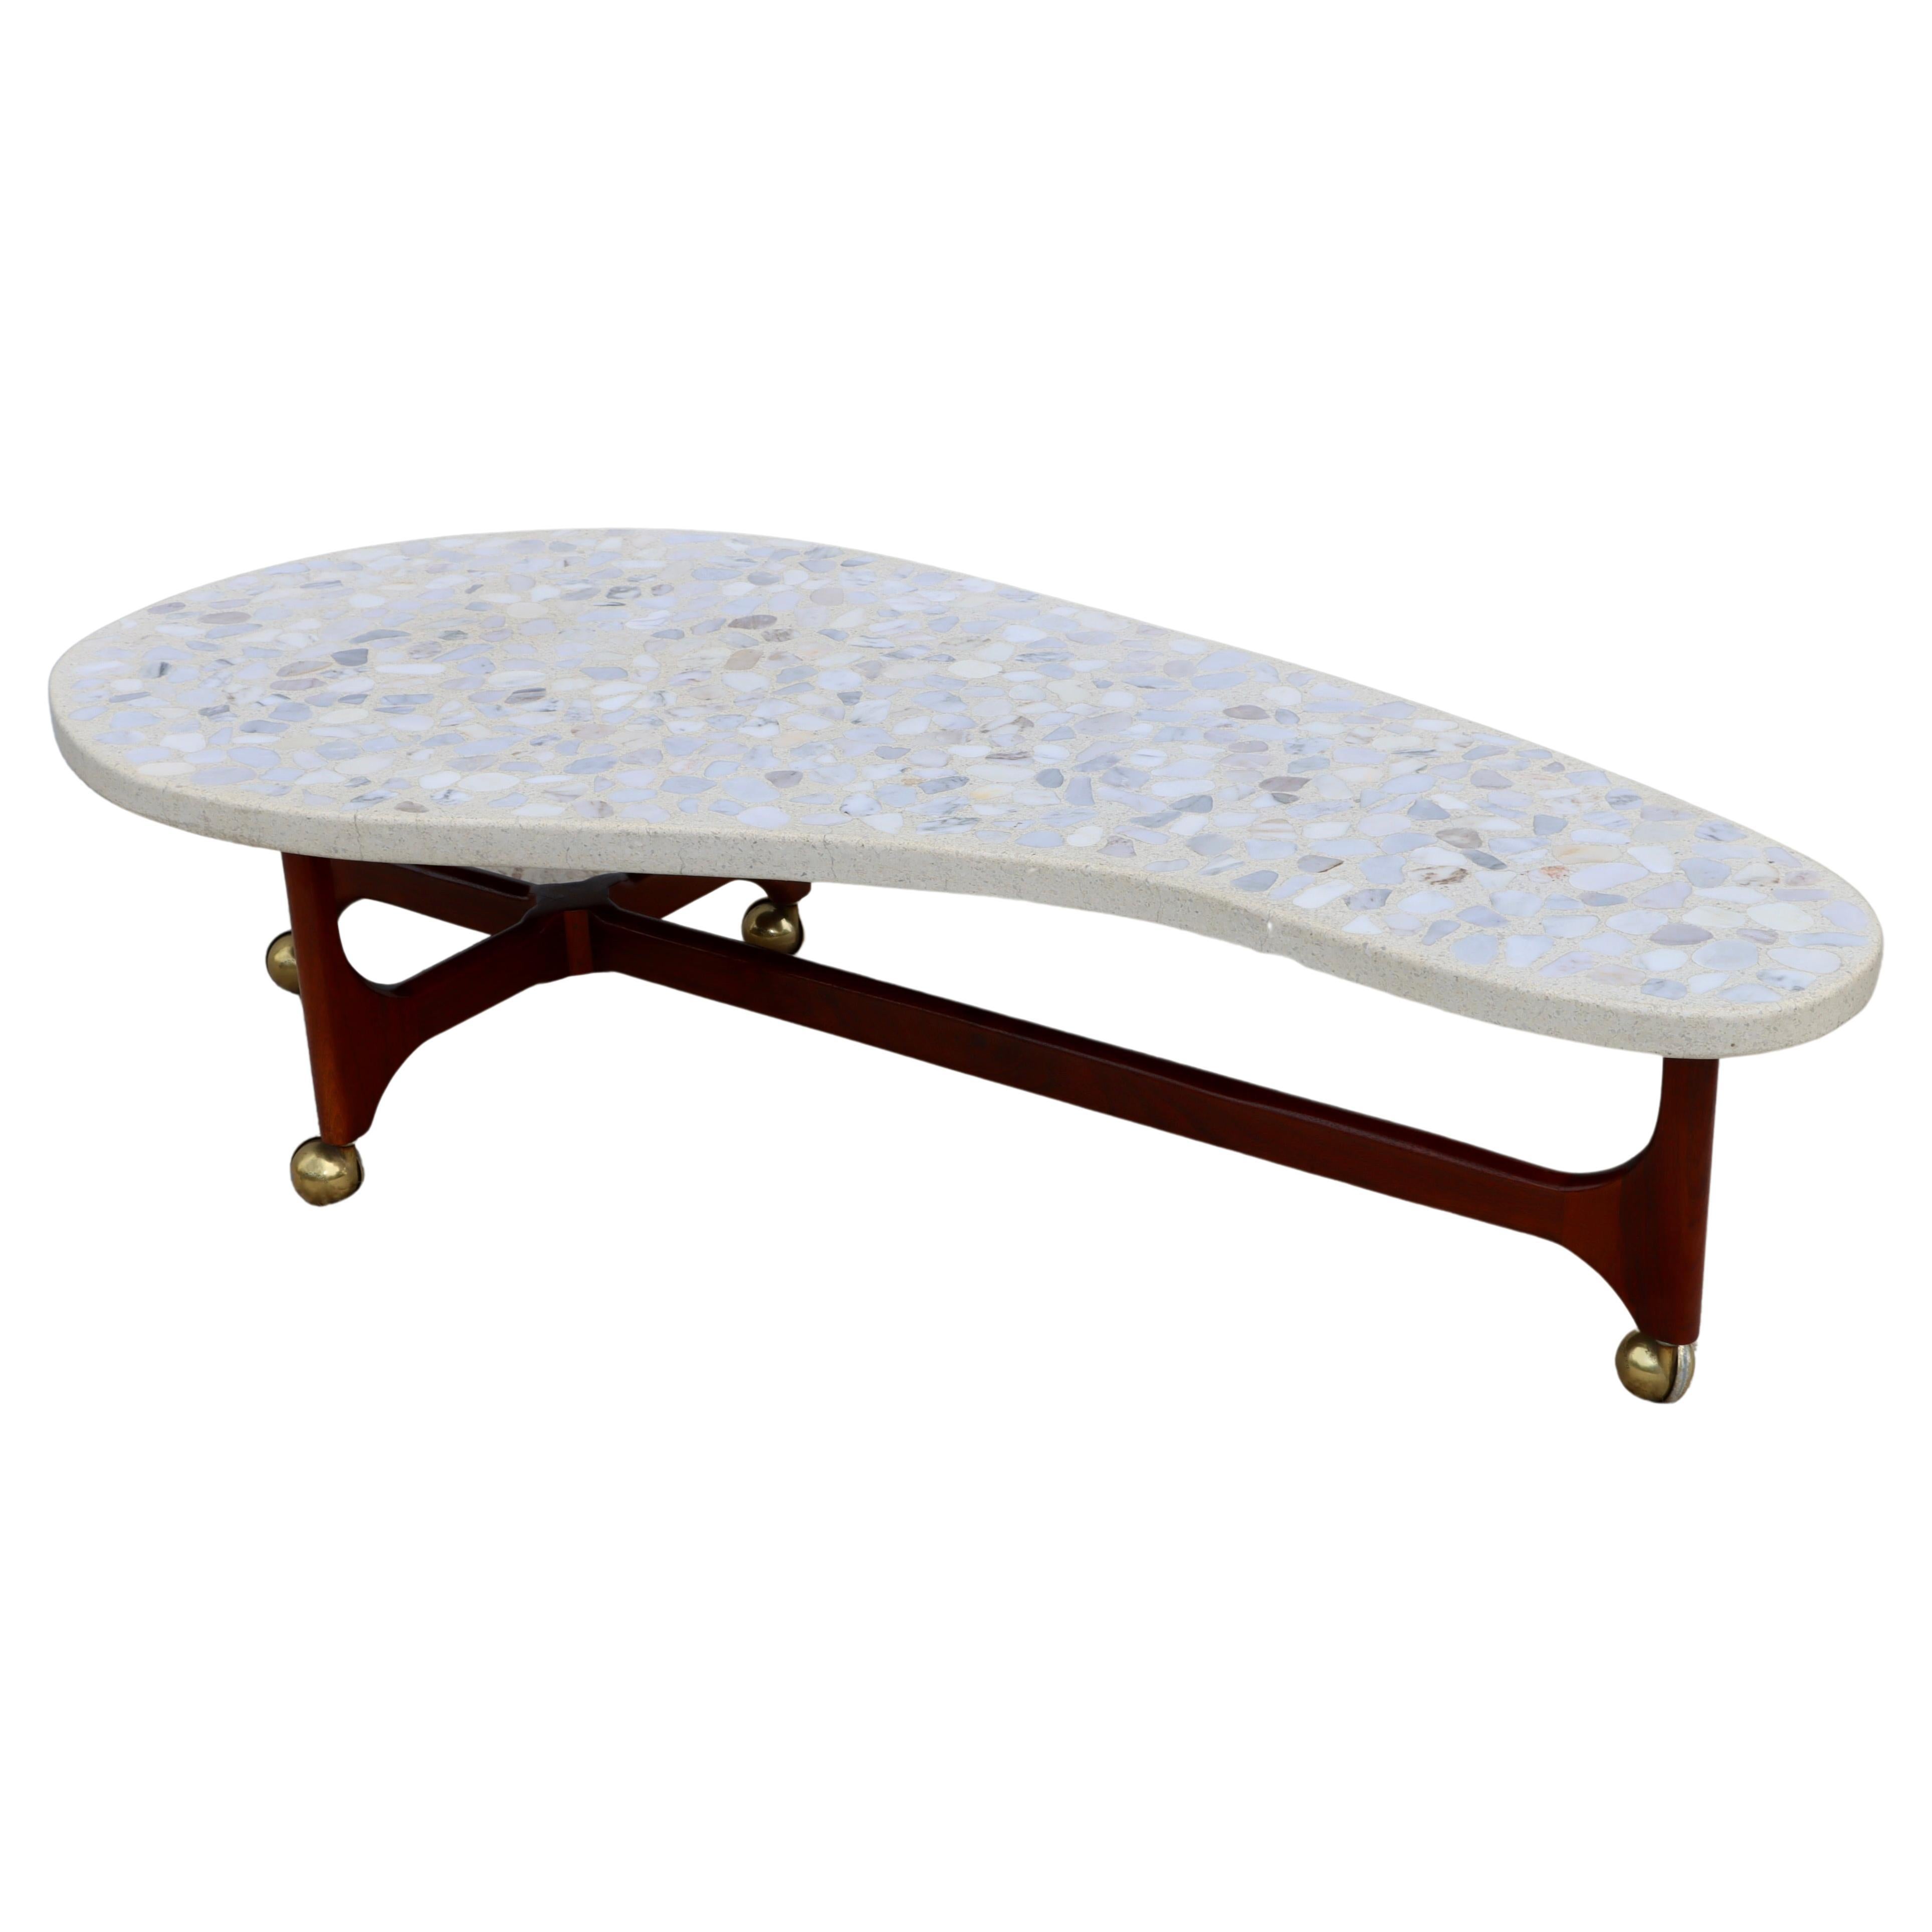 1960's Harvey Probber Style Modern Coffee Table With Terrazzo Top & Walnut Base  For Sale